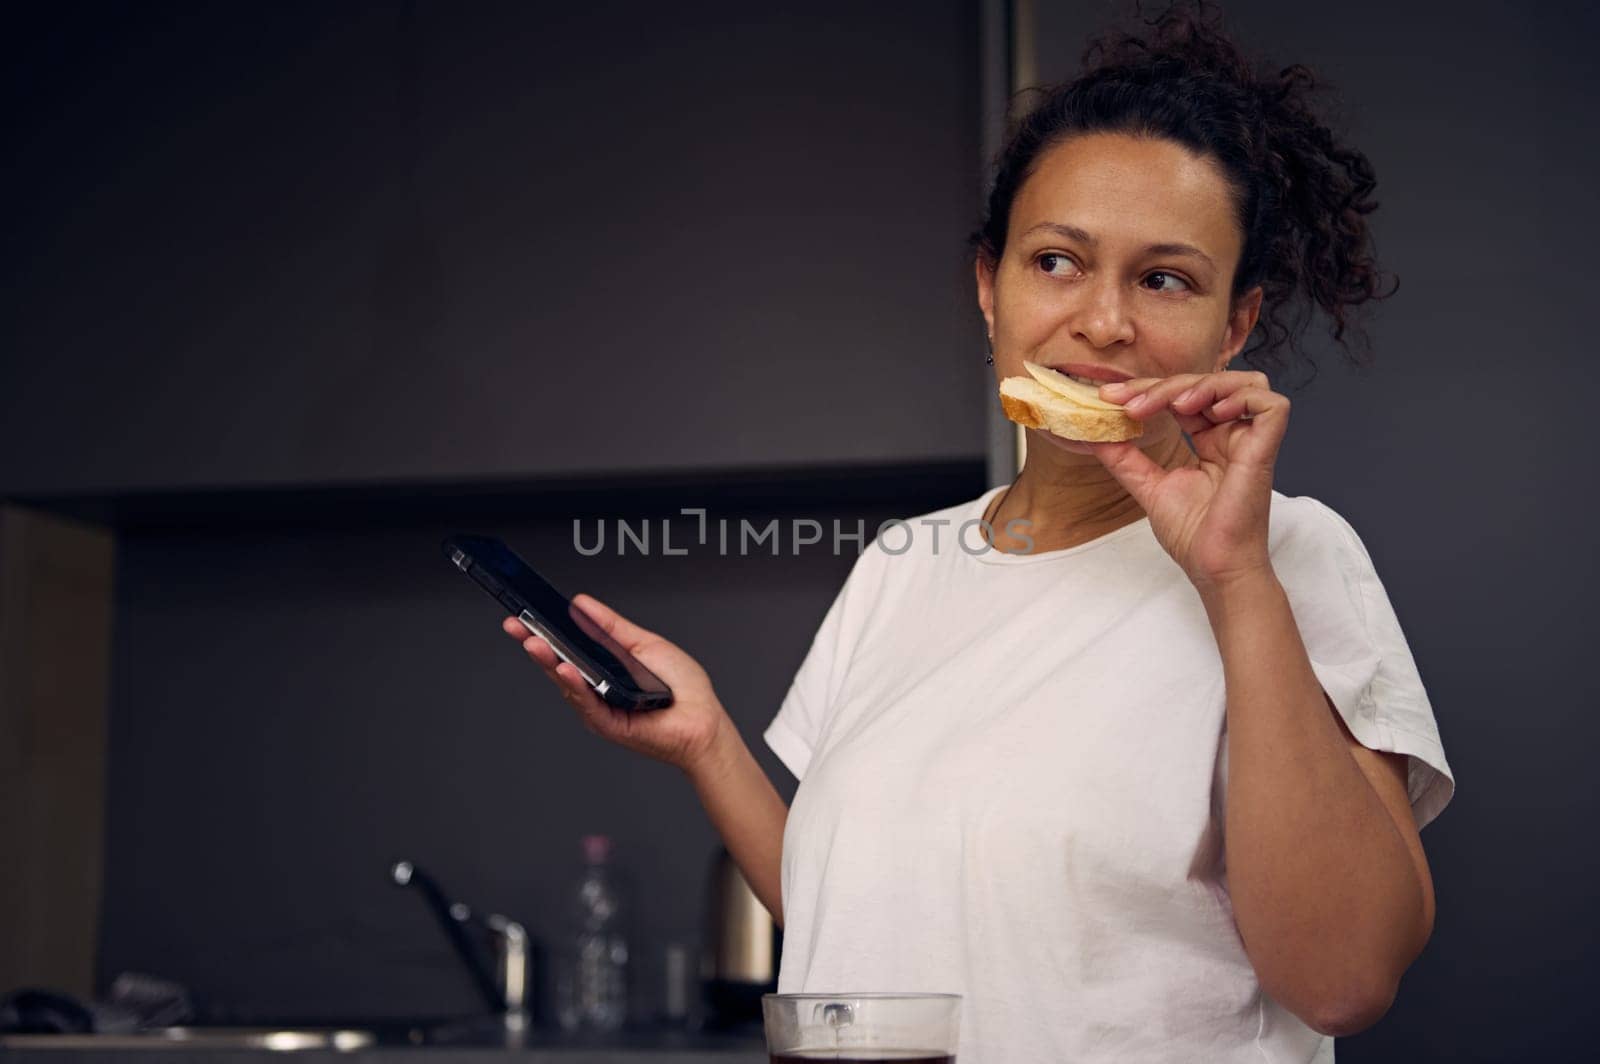 Authentic multi ethnic young adult woman 40s, eating sandwich with cheese and holding her smartphone in hands, smiling looking aside, standing at kitchen counter in minimalist home kitchen interior.